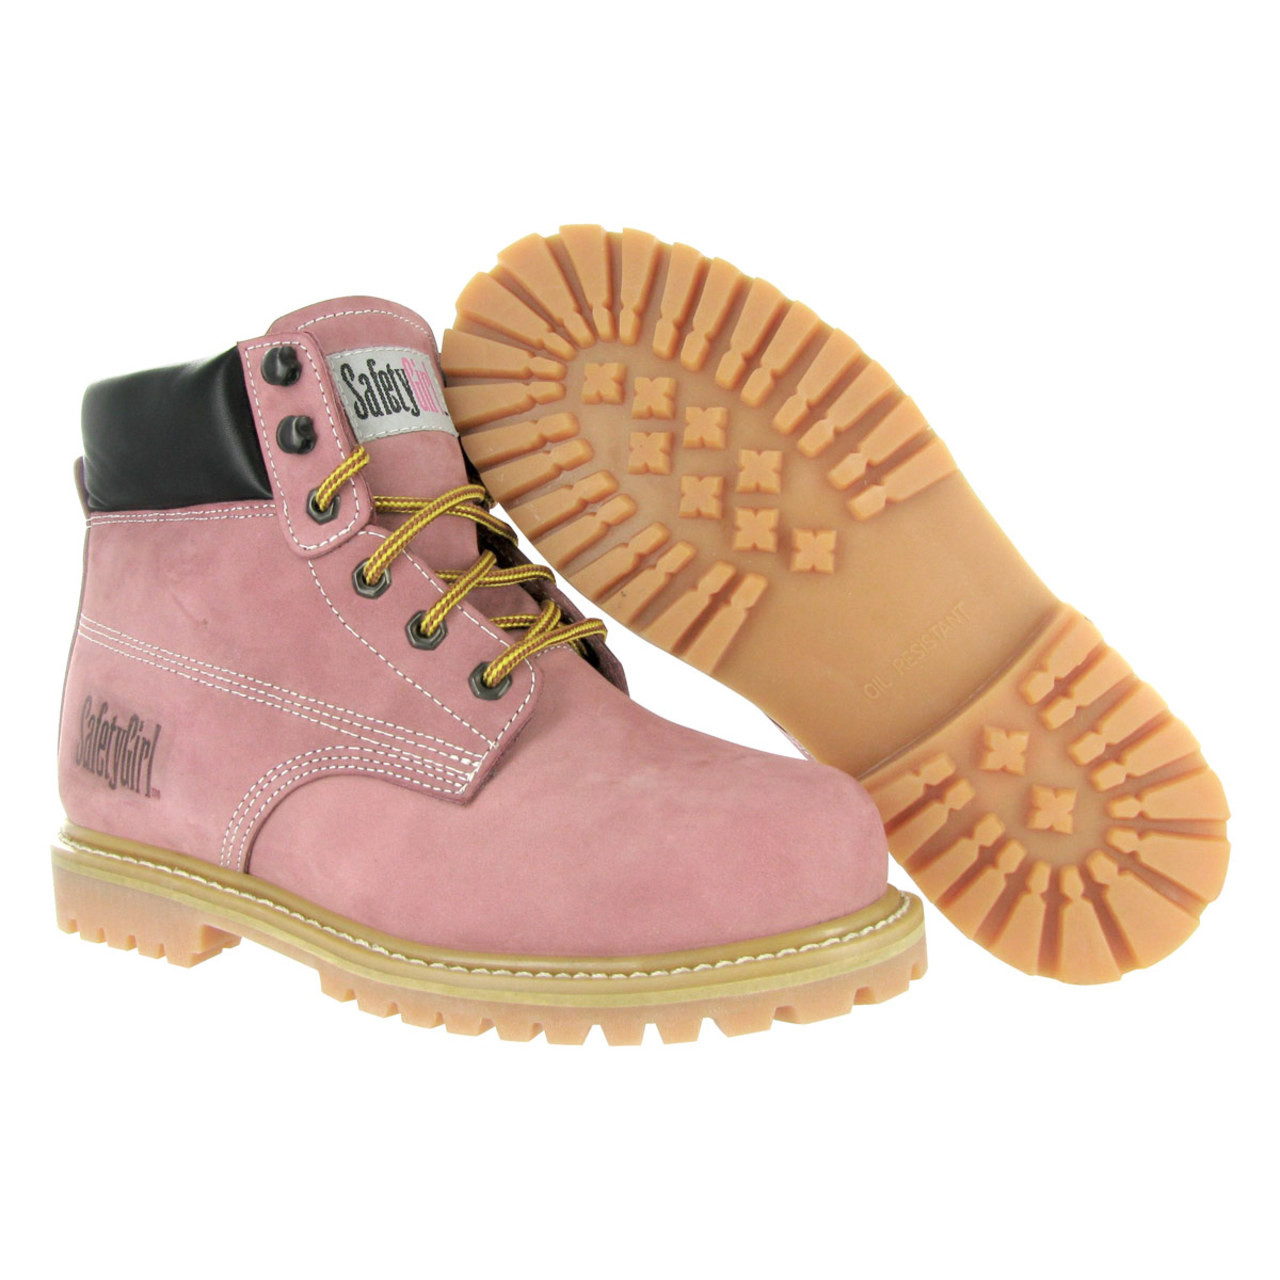 Image of Safety Girl Steel Toe Work Boots - Light Pink - AMZ